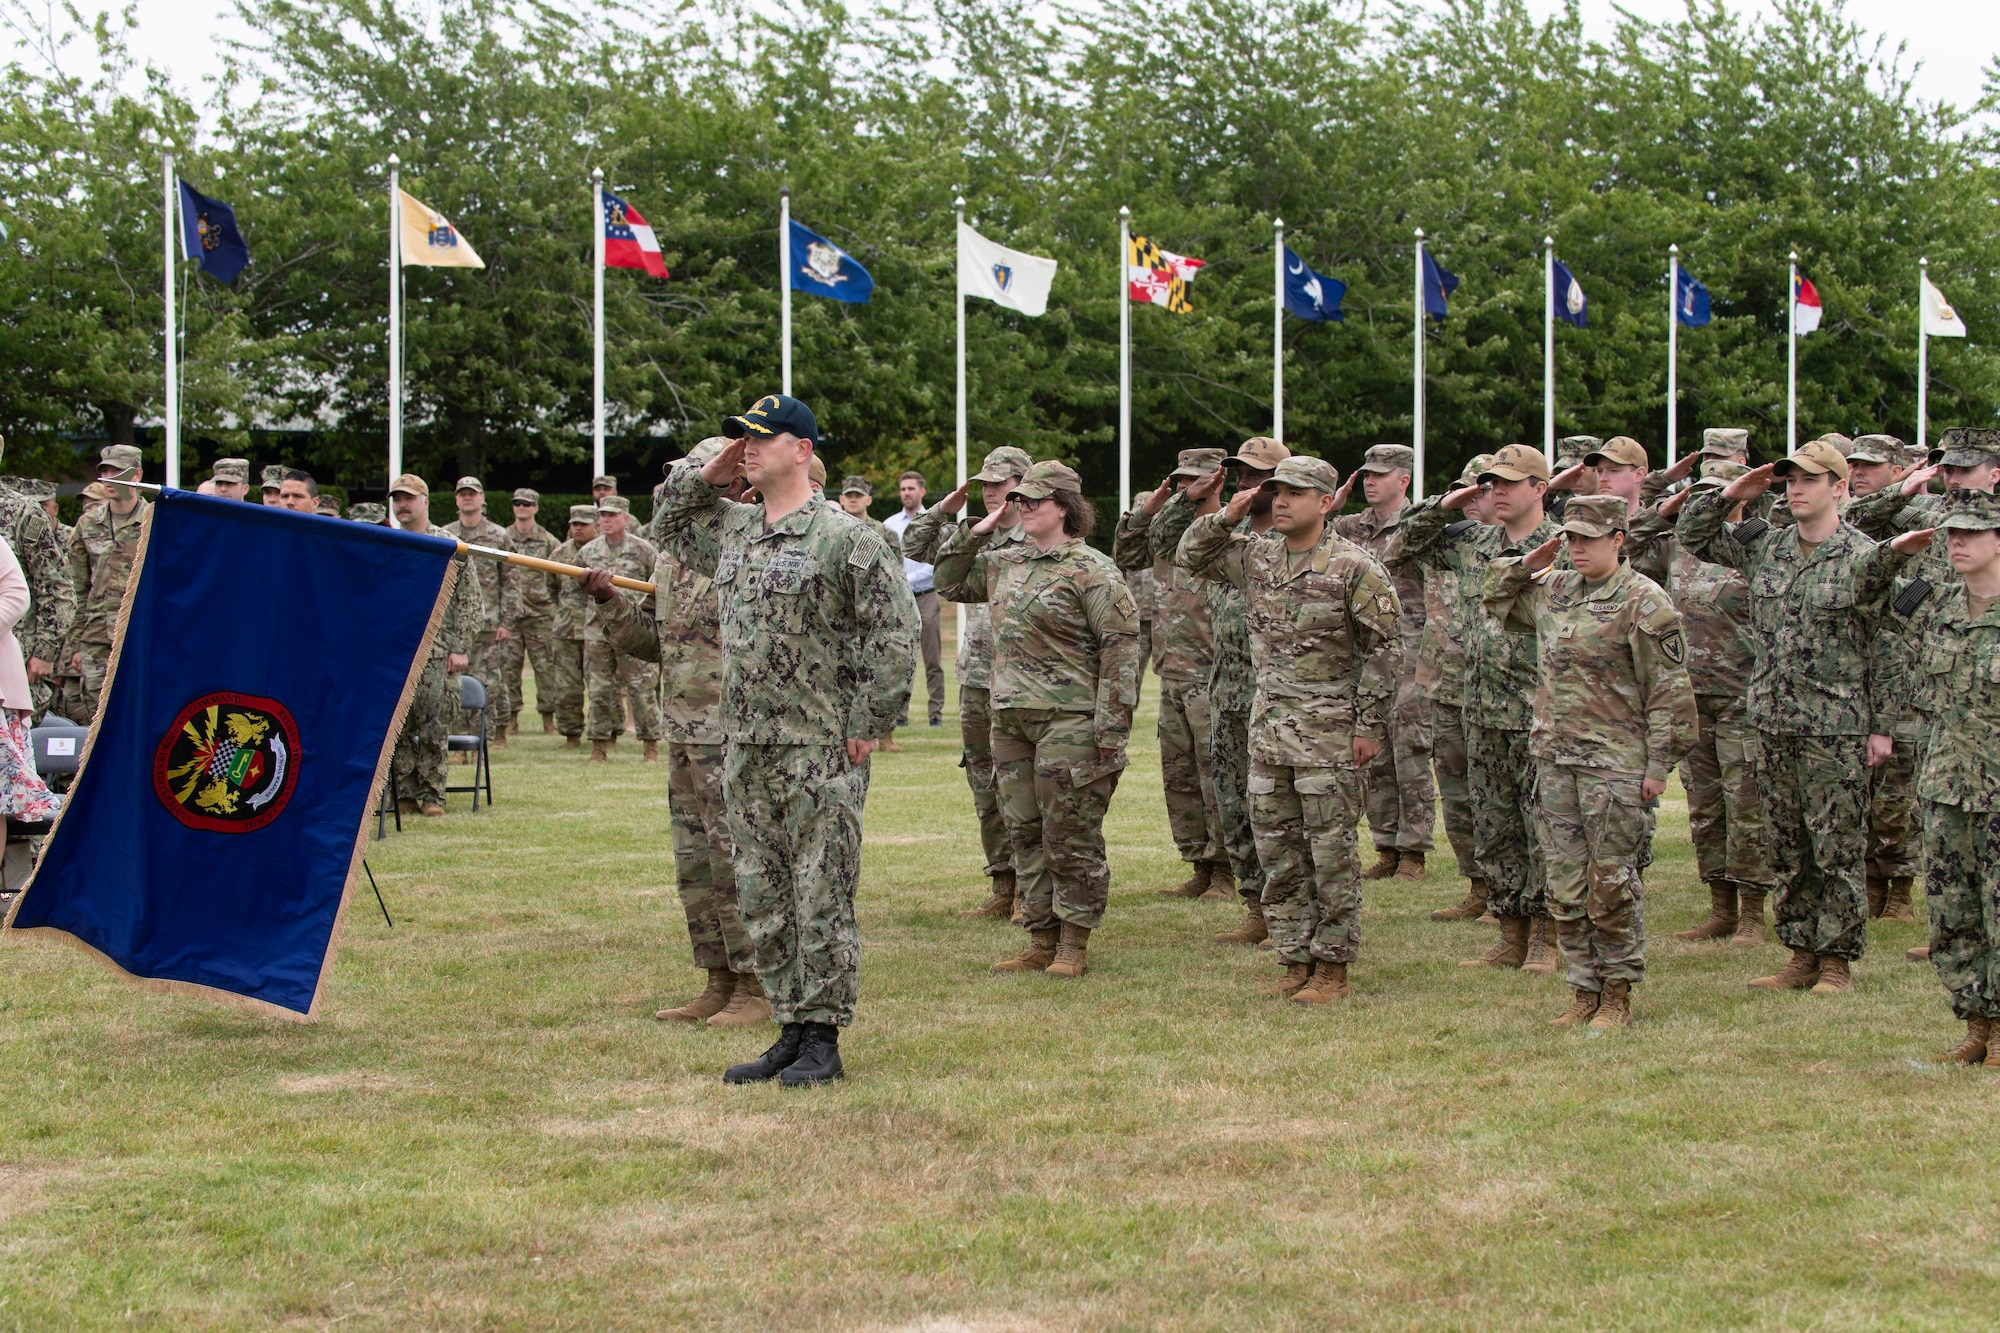 Members of the Joint Intelligence Operations Center Europe Analytic Center present a final salute during a change of command ceremony at Royal Air Force Molesworth, England, July 7, 2022. The change of command ceremony is rooted in military history dating back to the 18th century representing the relinquishing of power from one officer to another. (U.S. Air Force photo by Senior Airman Jennifer Zima)